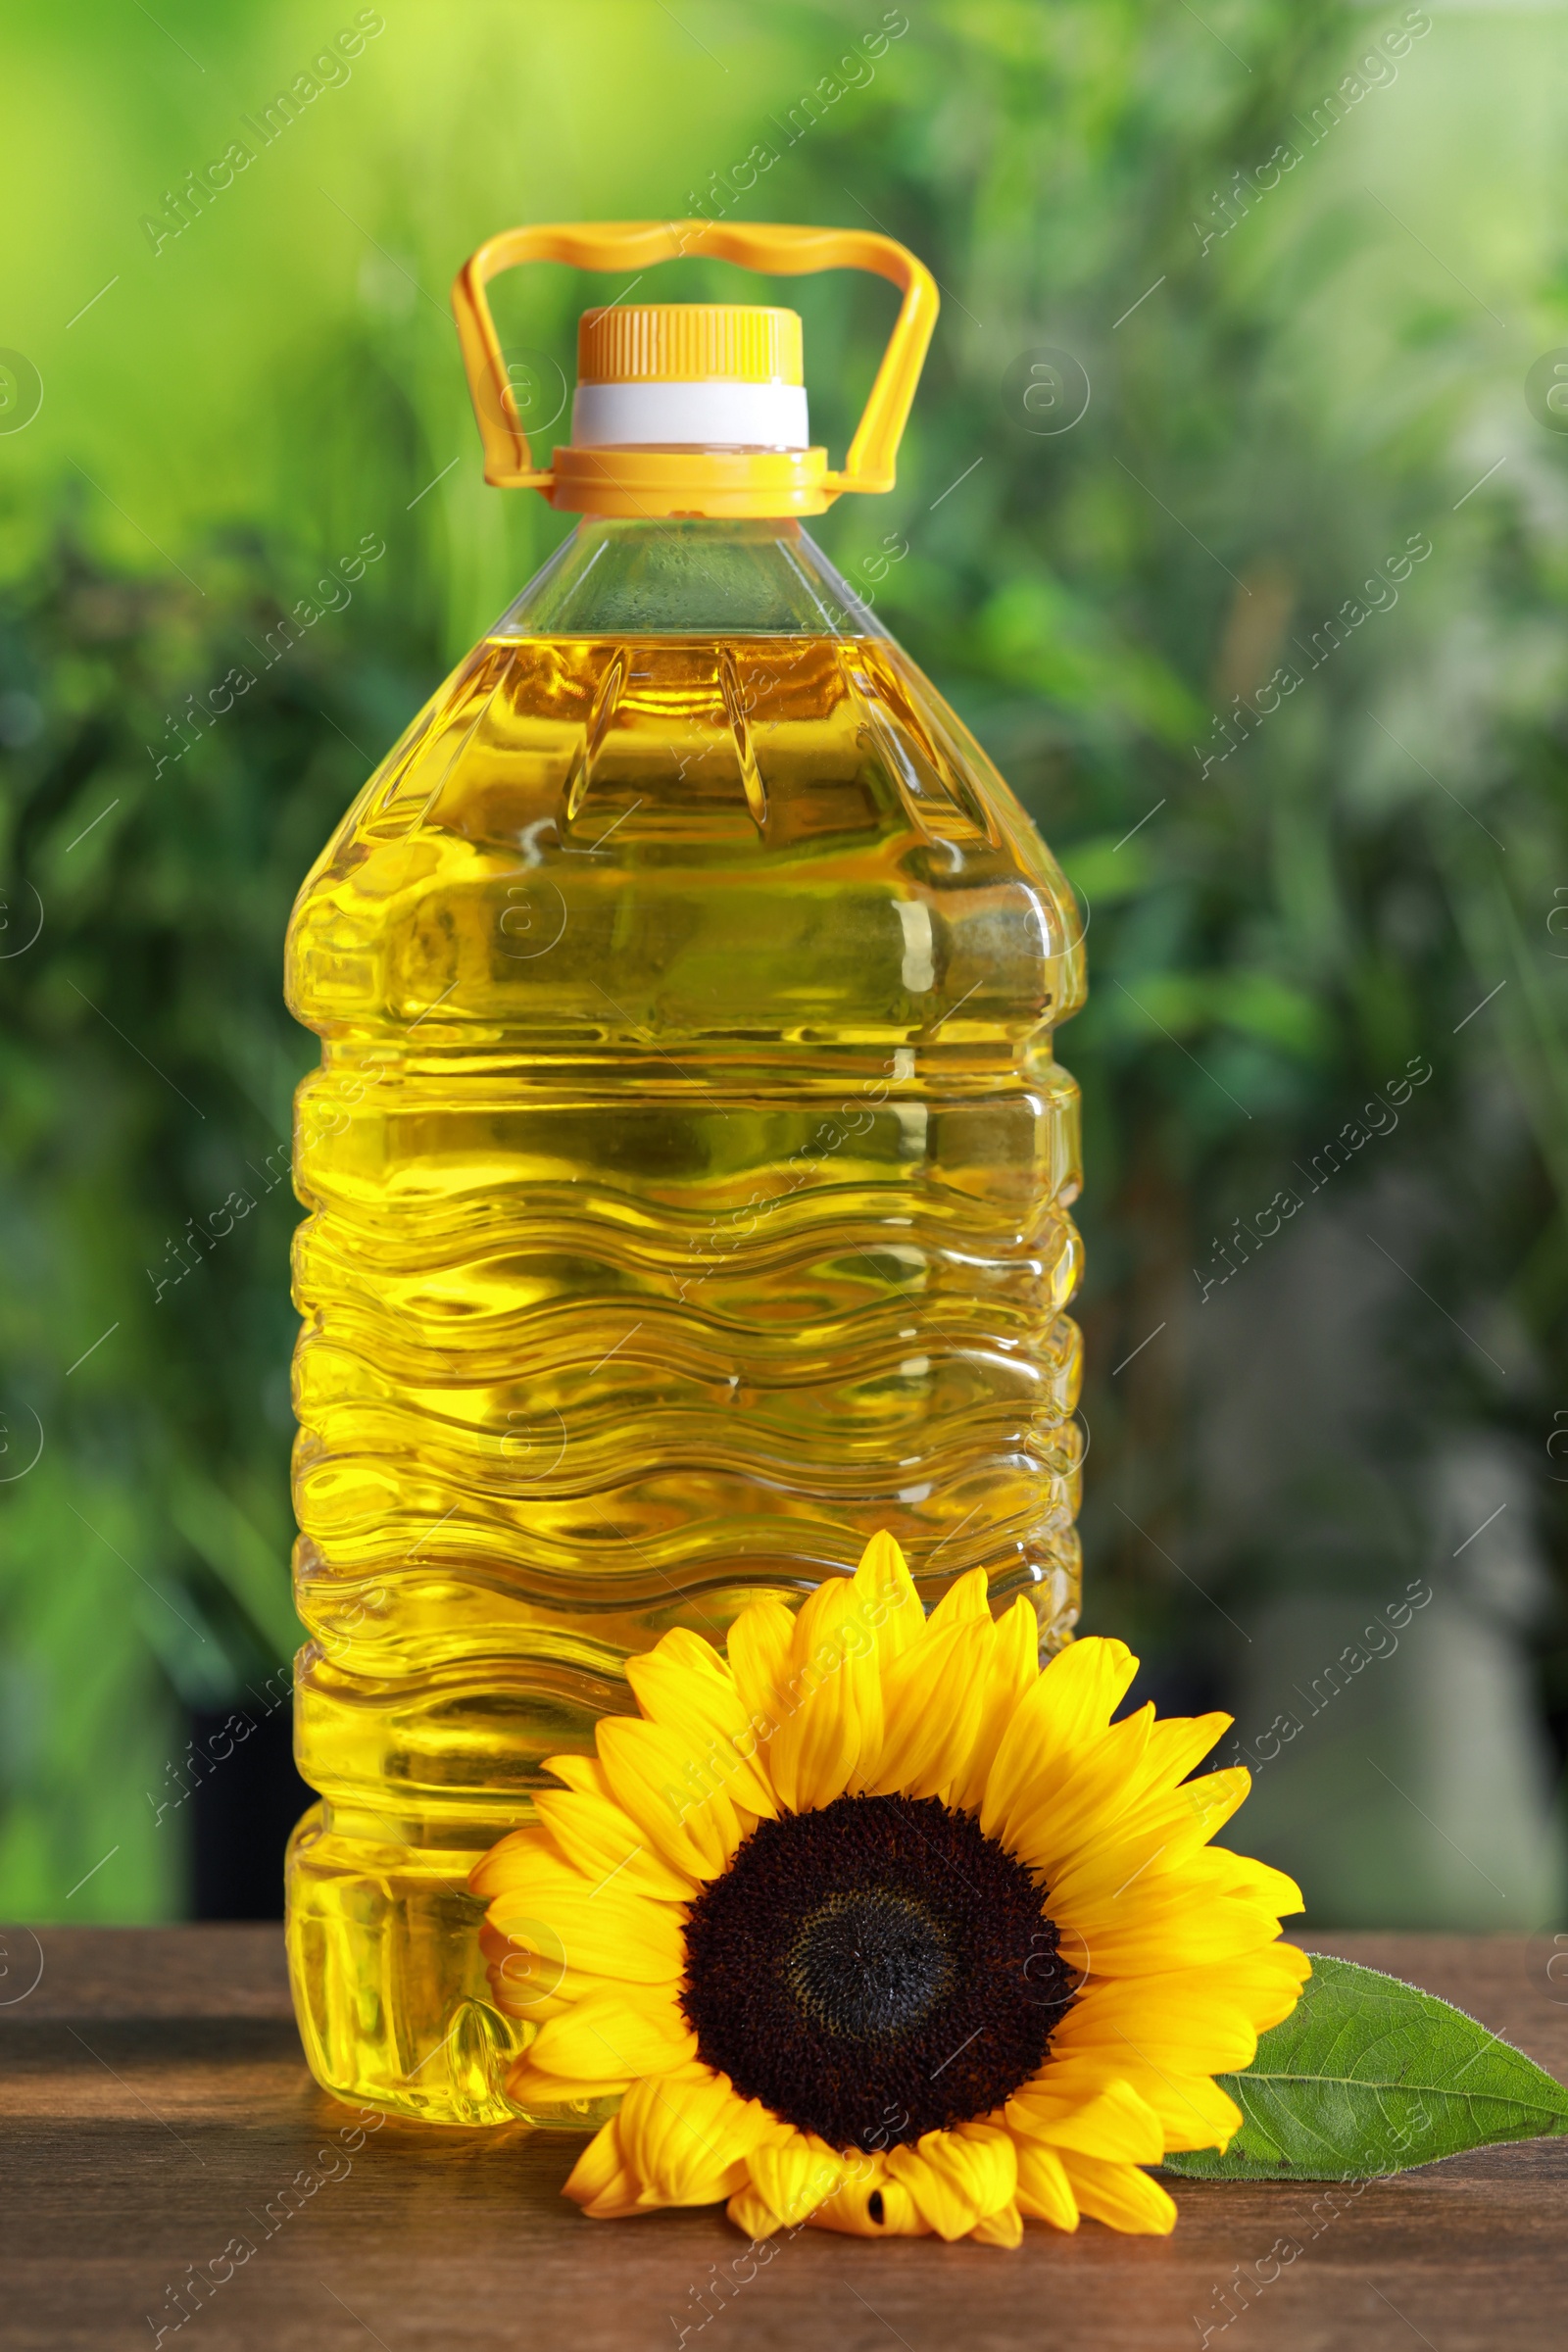 Photo of Bottle of cooking oil and sunflower on wooden table against blurred background